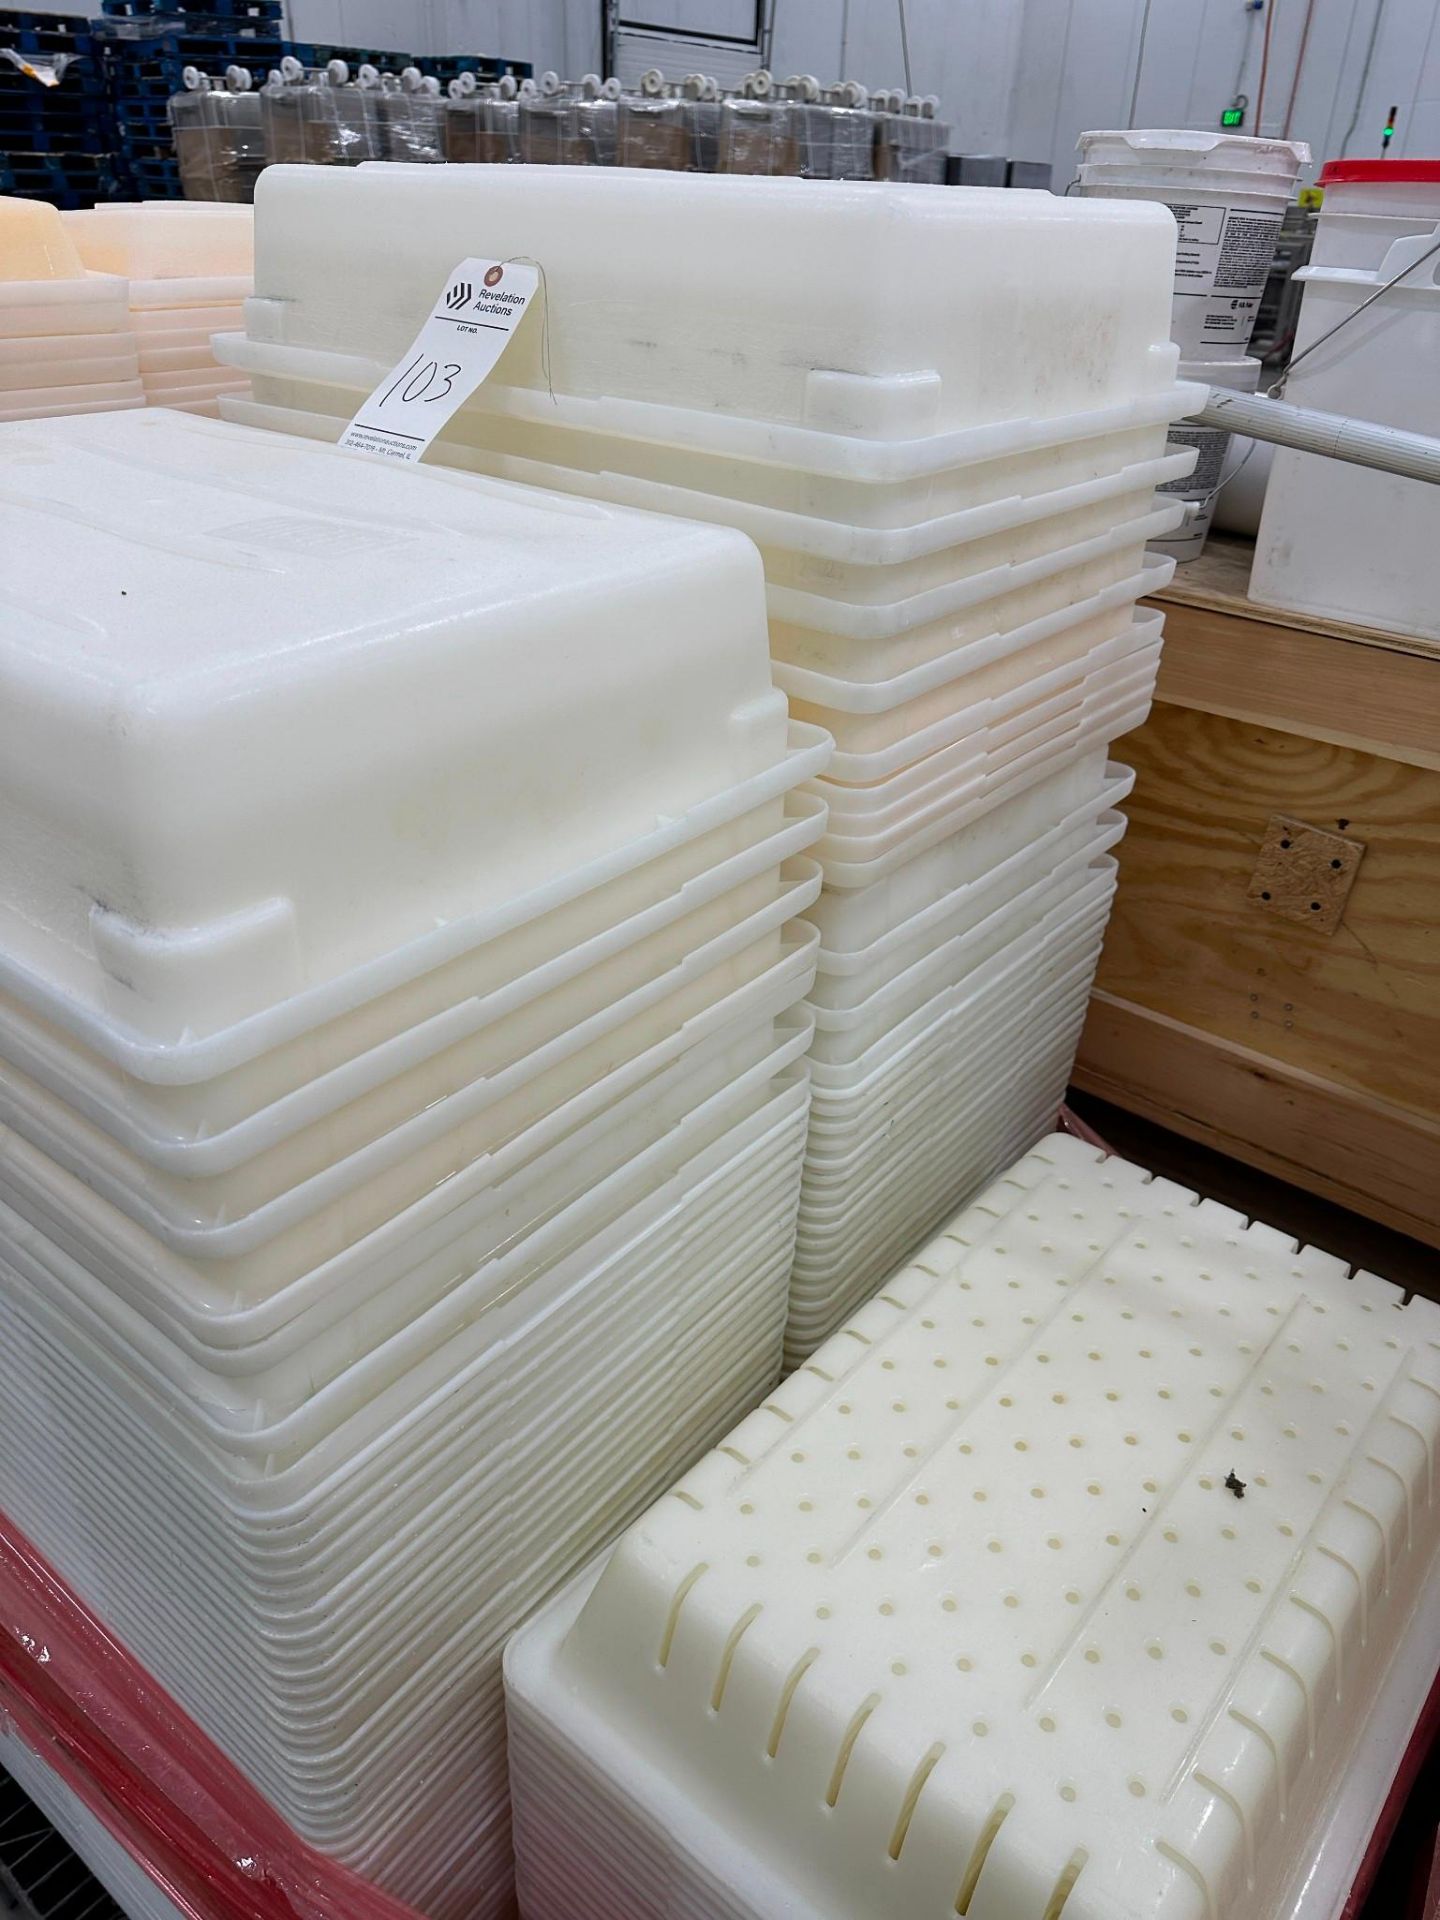 SKID OF FLAT AND PERFORATED PLASTIC TRAYS - Image 2 of 5